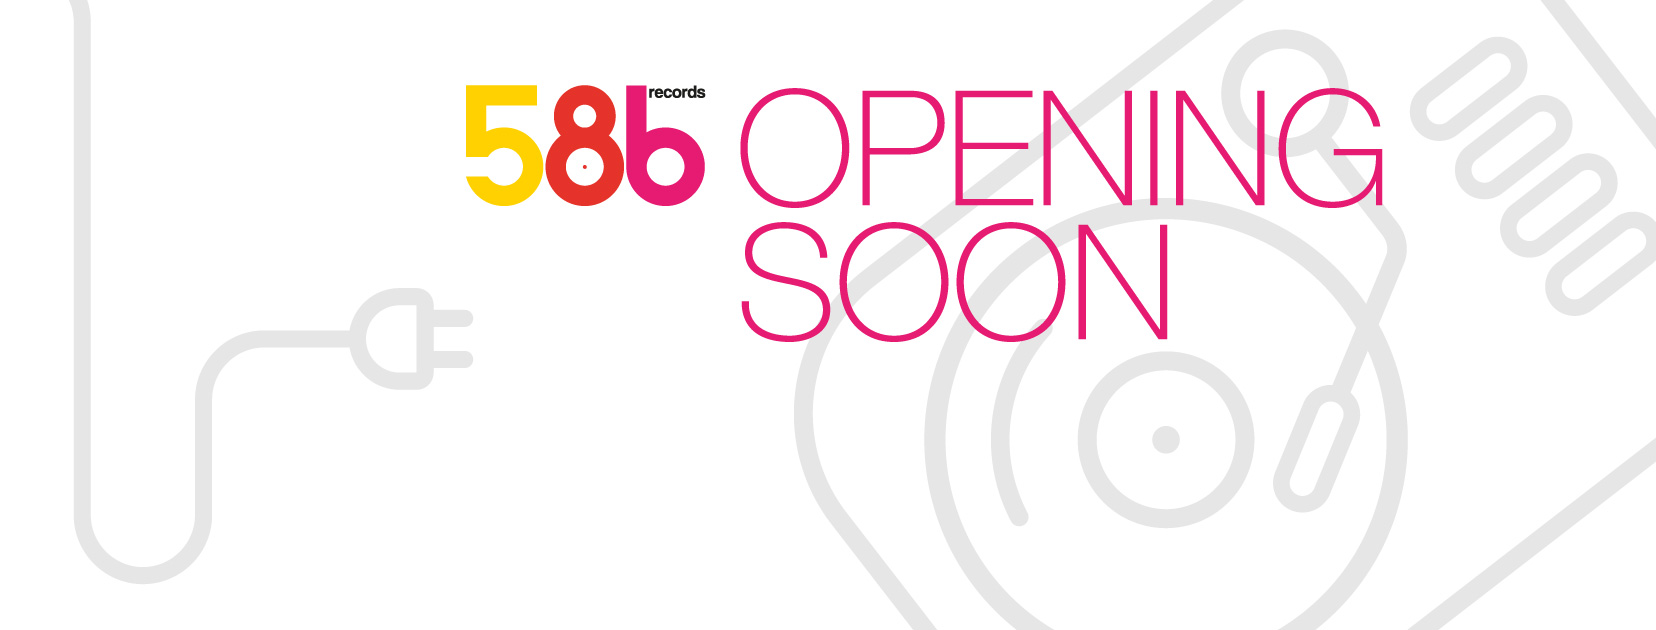 586 opening hours.